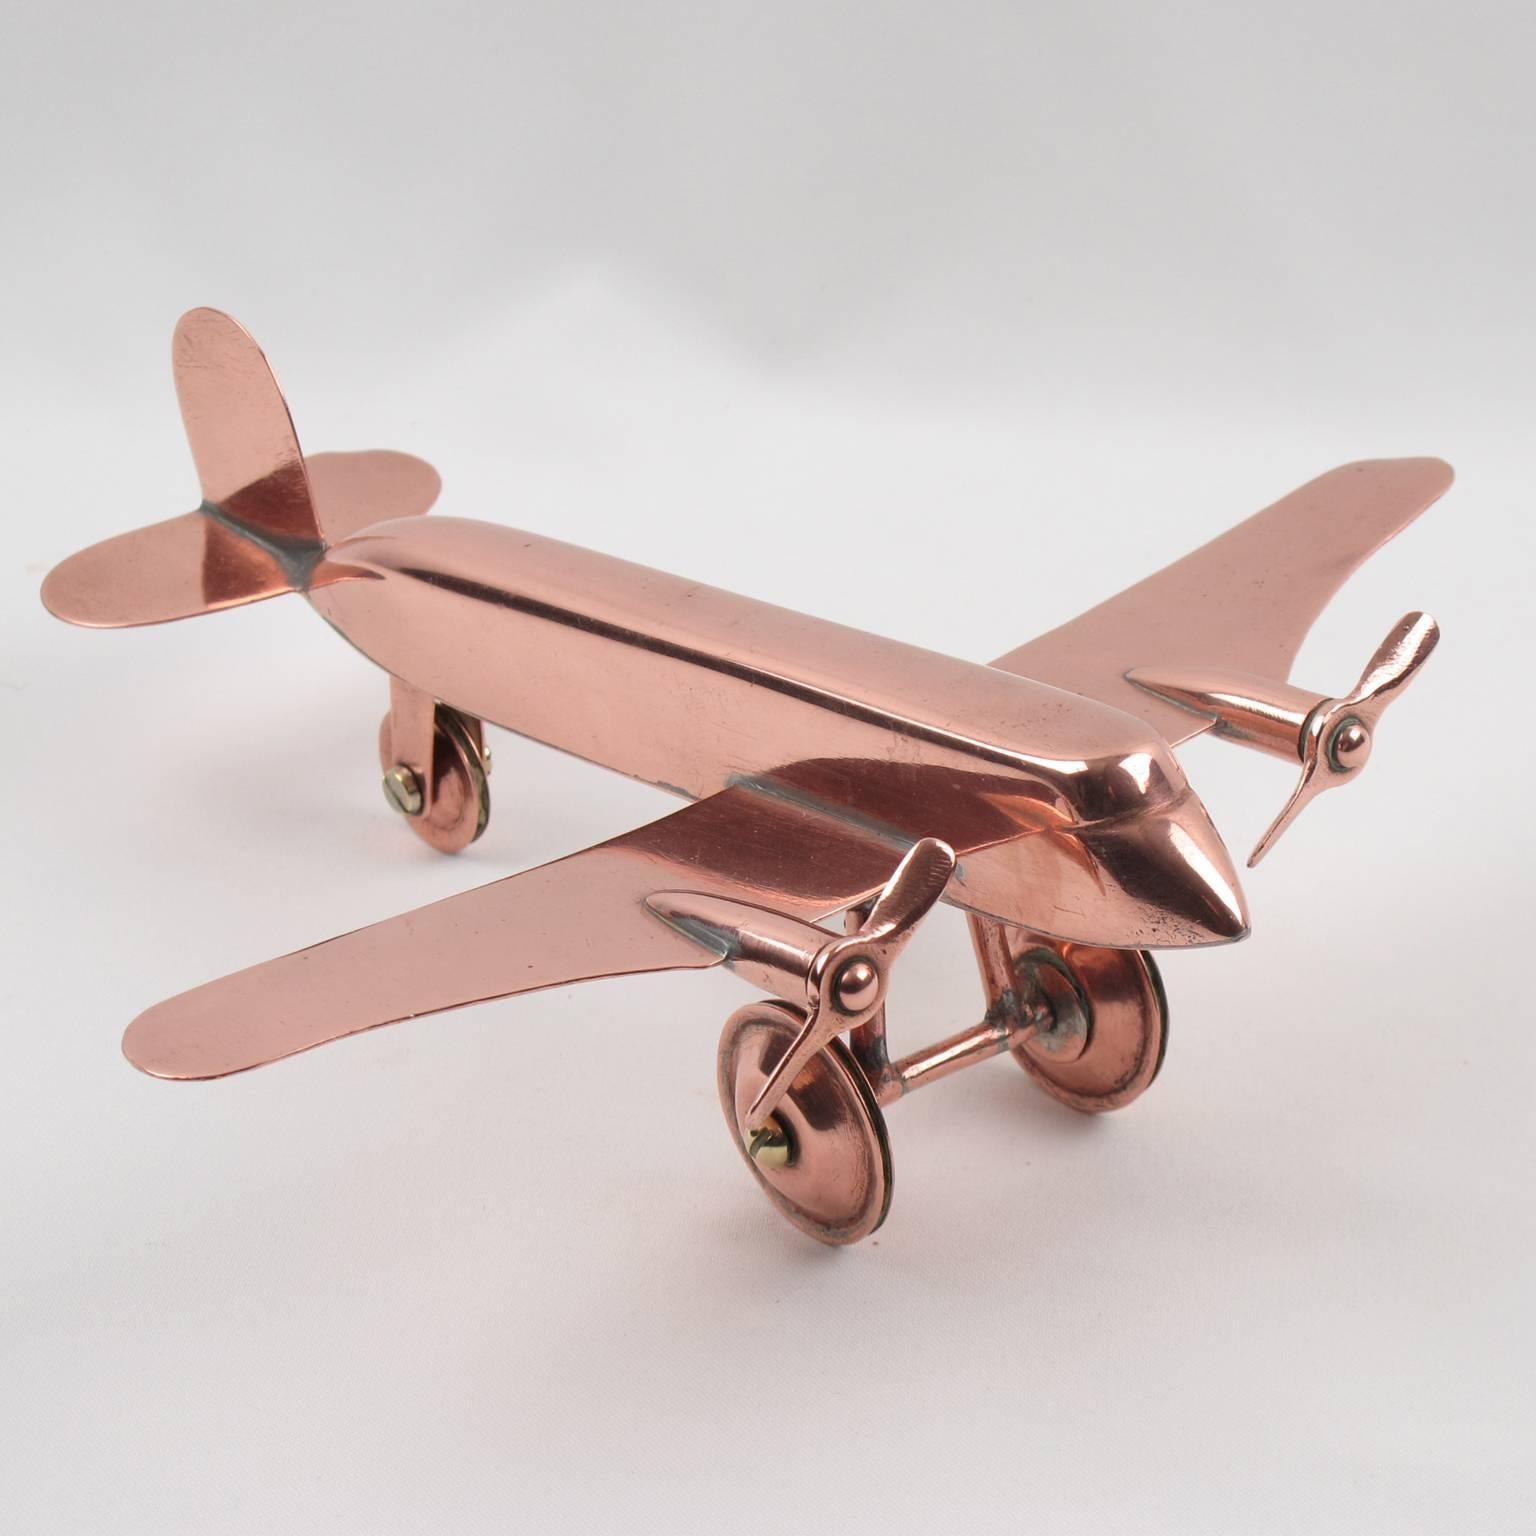 Rare stunning French copper airplane model. It is a small scale airplane with intricate details and looks great displayed on a desk. Two copper propellers in rotating condition. Model stands on its wheels in working condition. No visible marking.